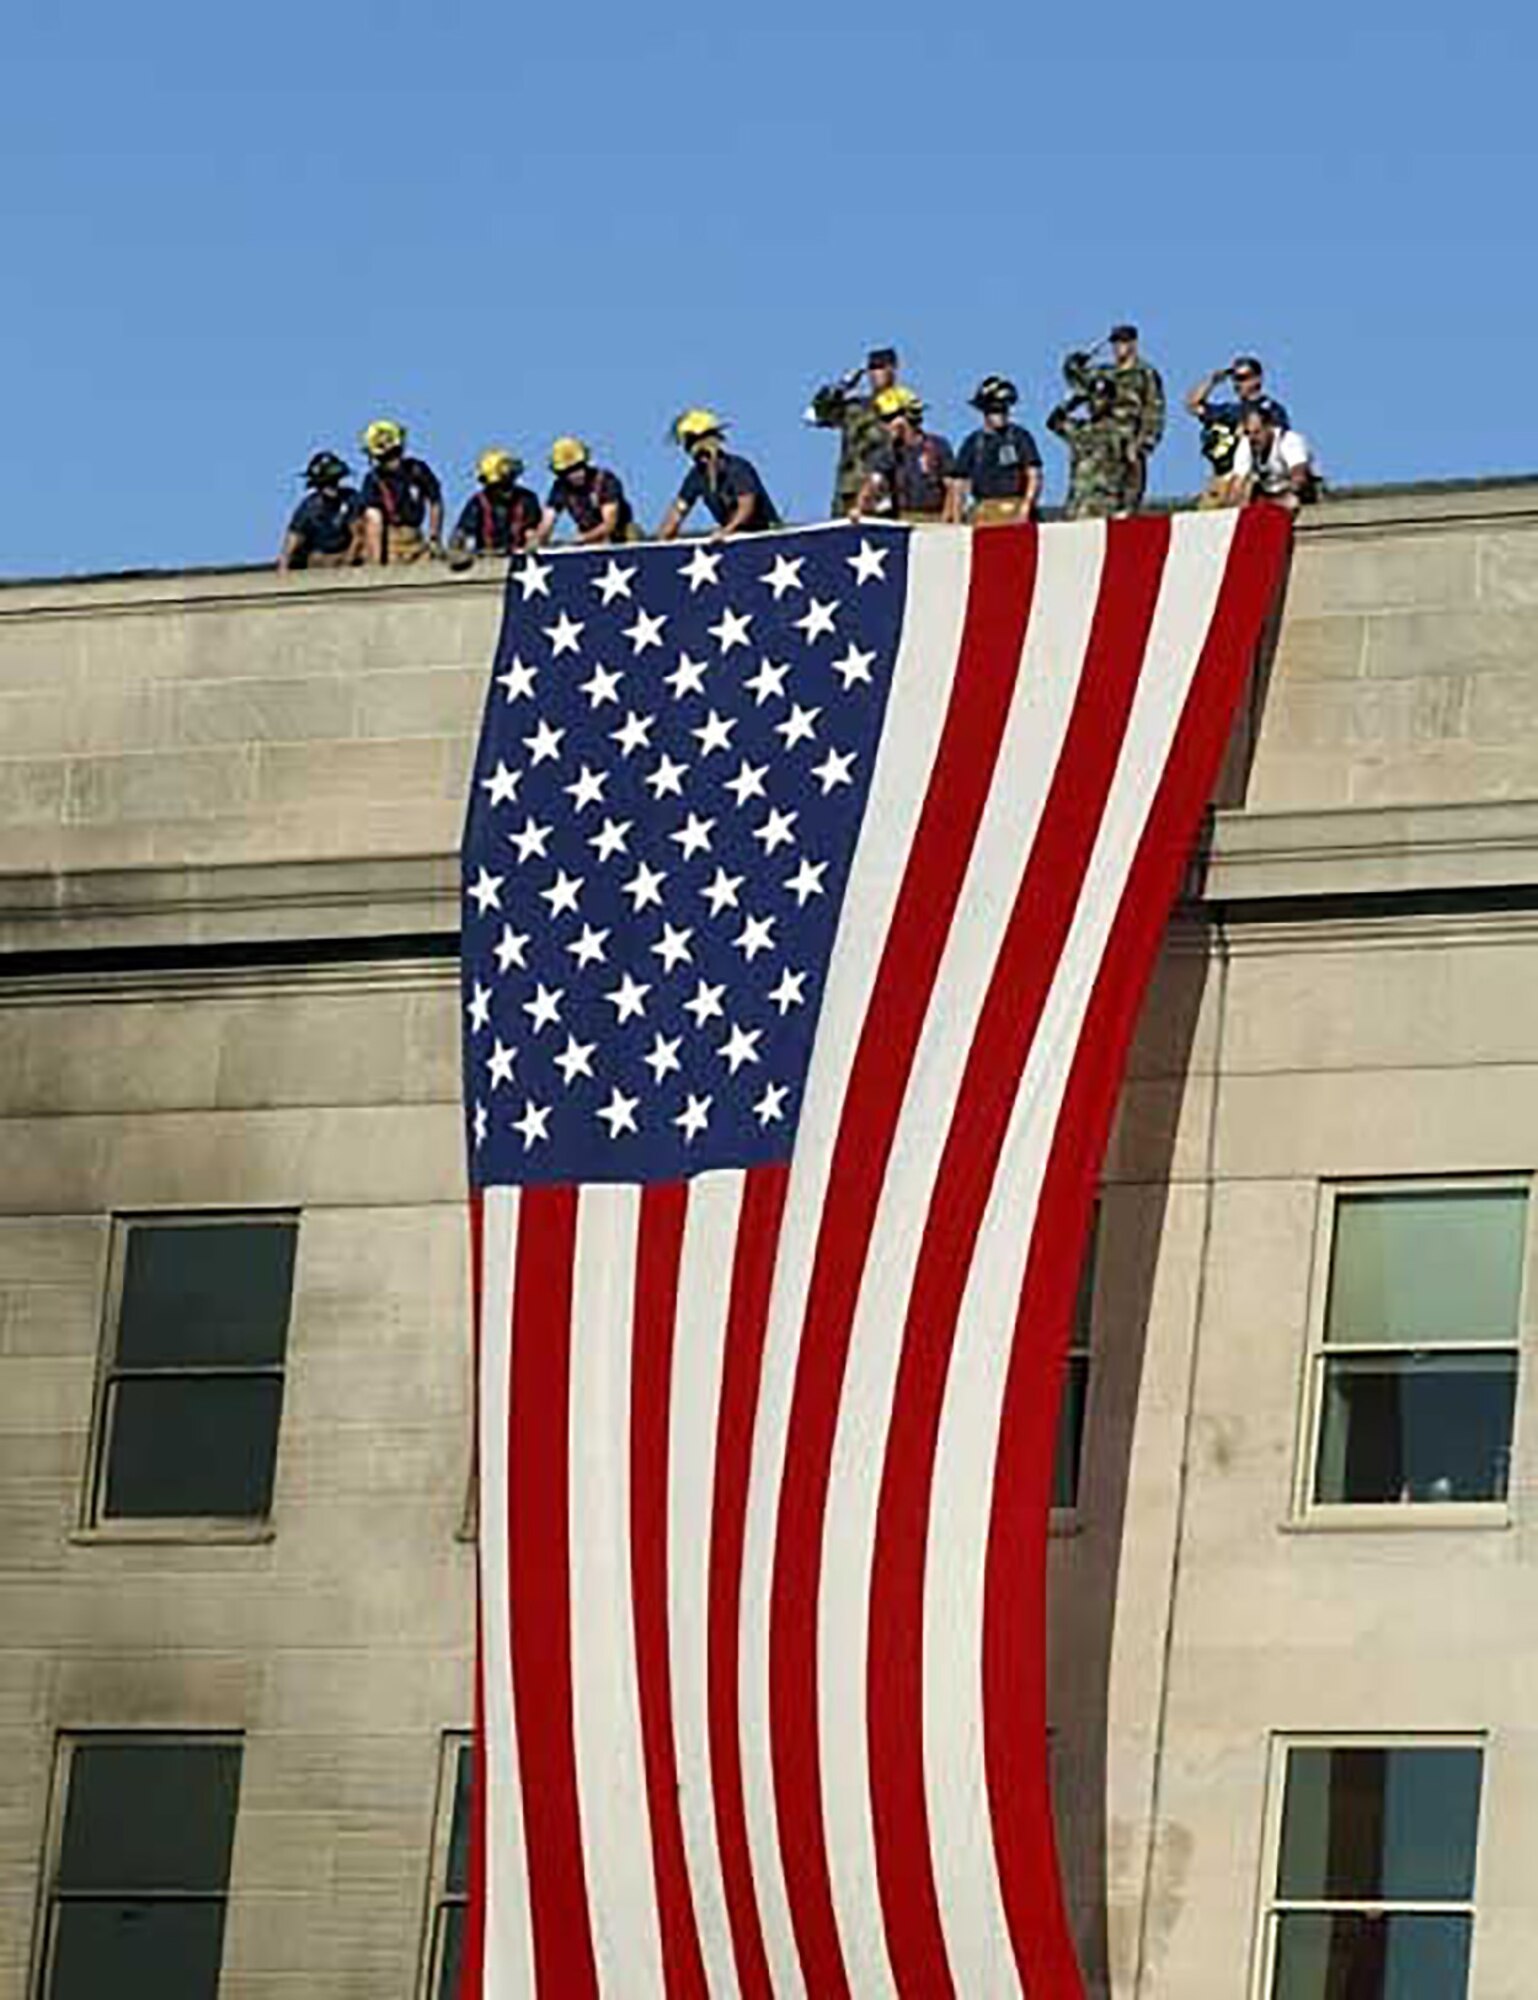 Today marks the 17th anniversary of the September 11 attacks. Here at Travis, we will be commemorating the event with a Patriot's Day ceremony at the wing's headquarters from 8:30 a.m. to 10:30 a.m.